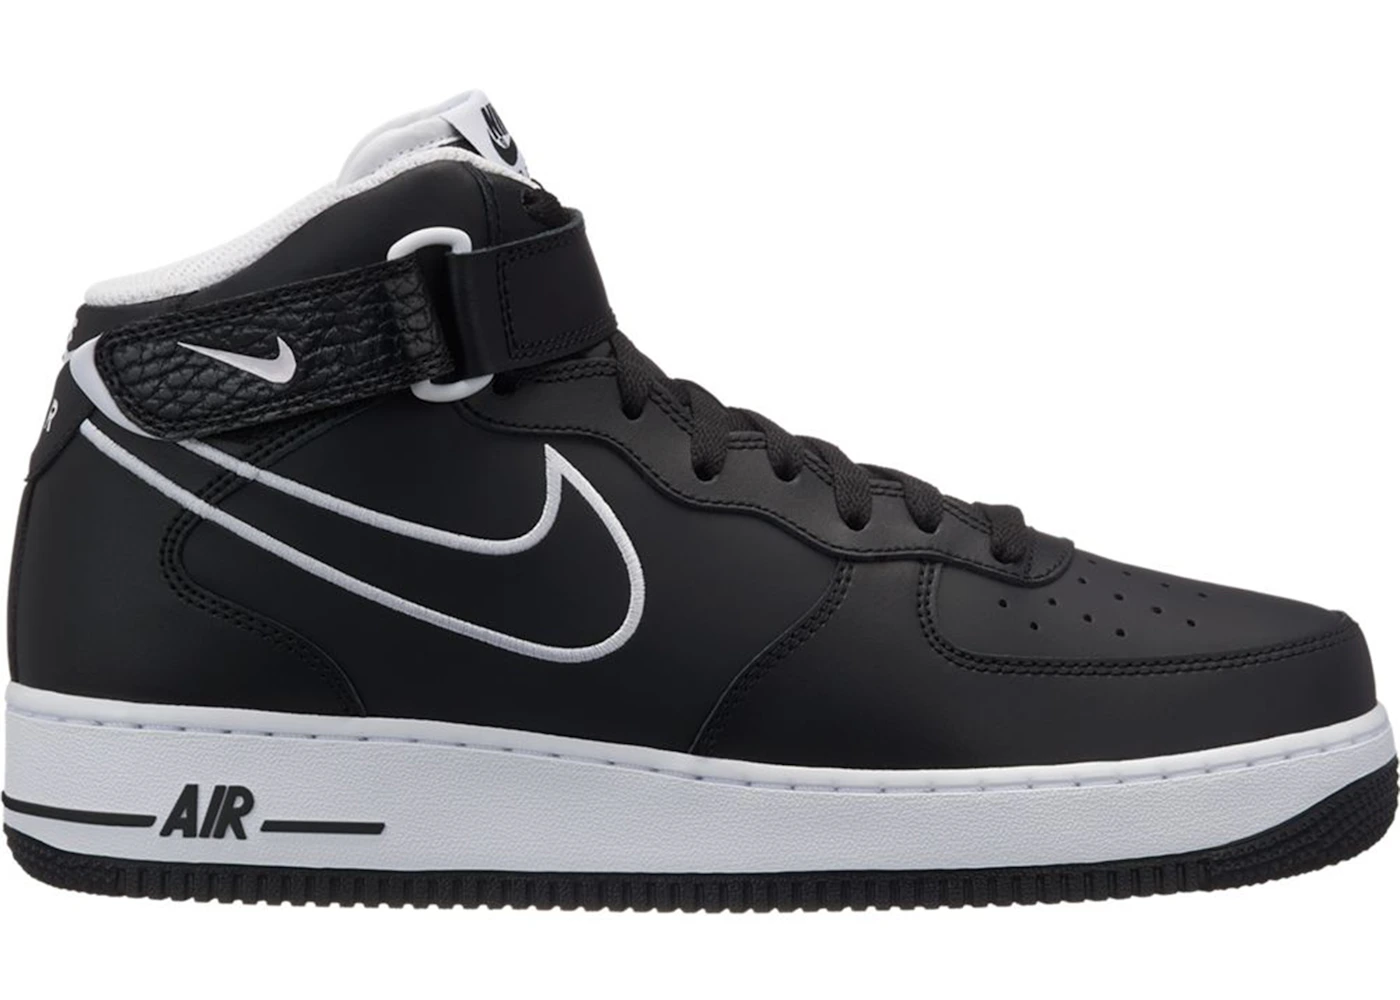 Nike Air Force 1 Mid Leather Black White Men's - AQ8650-001 - US